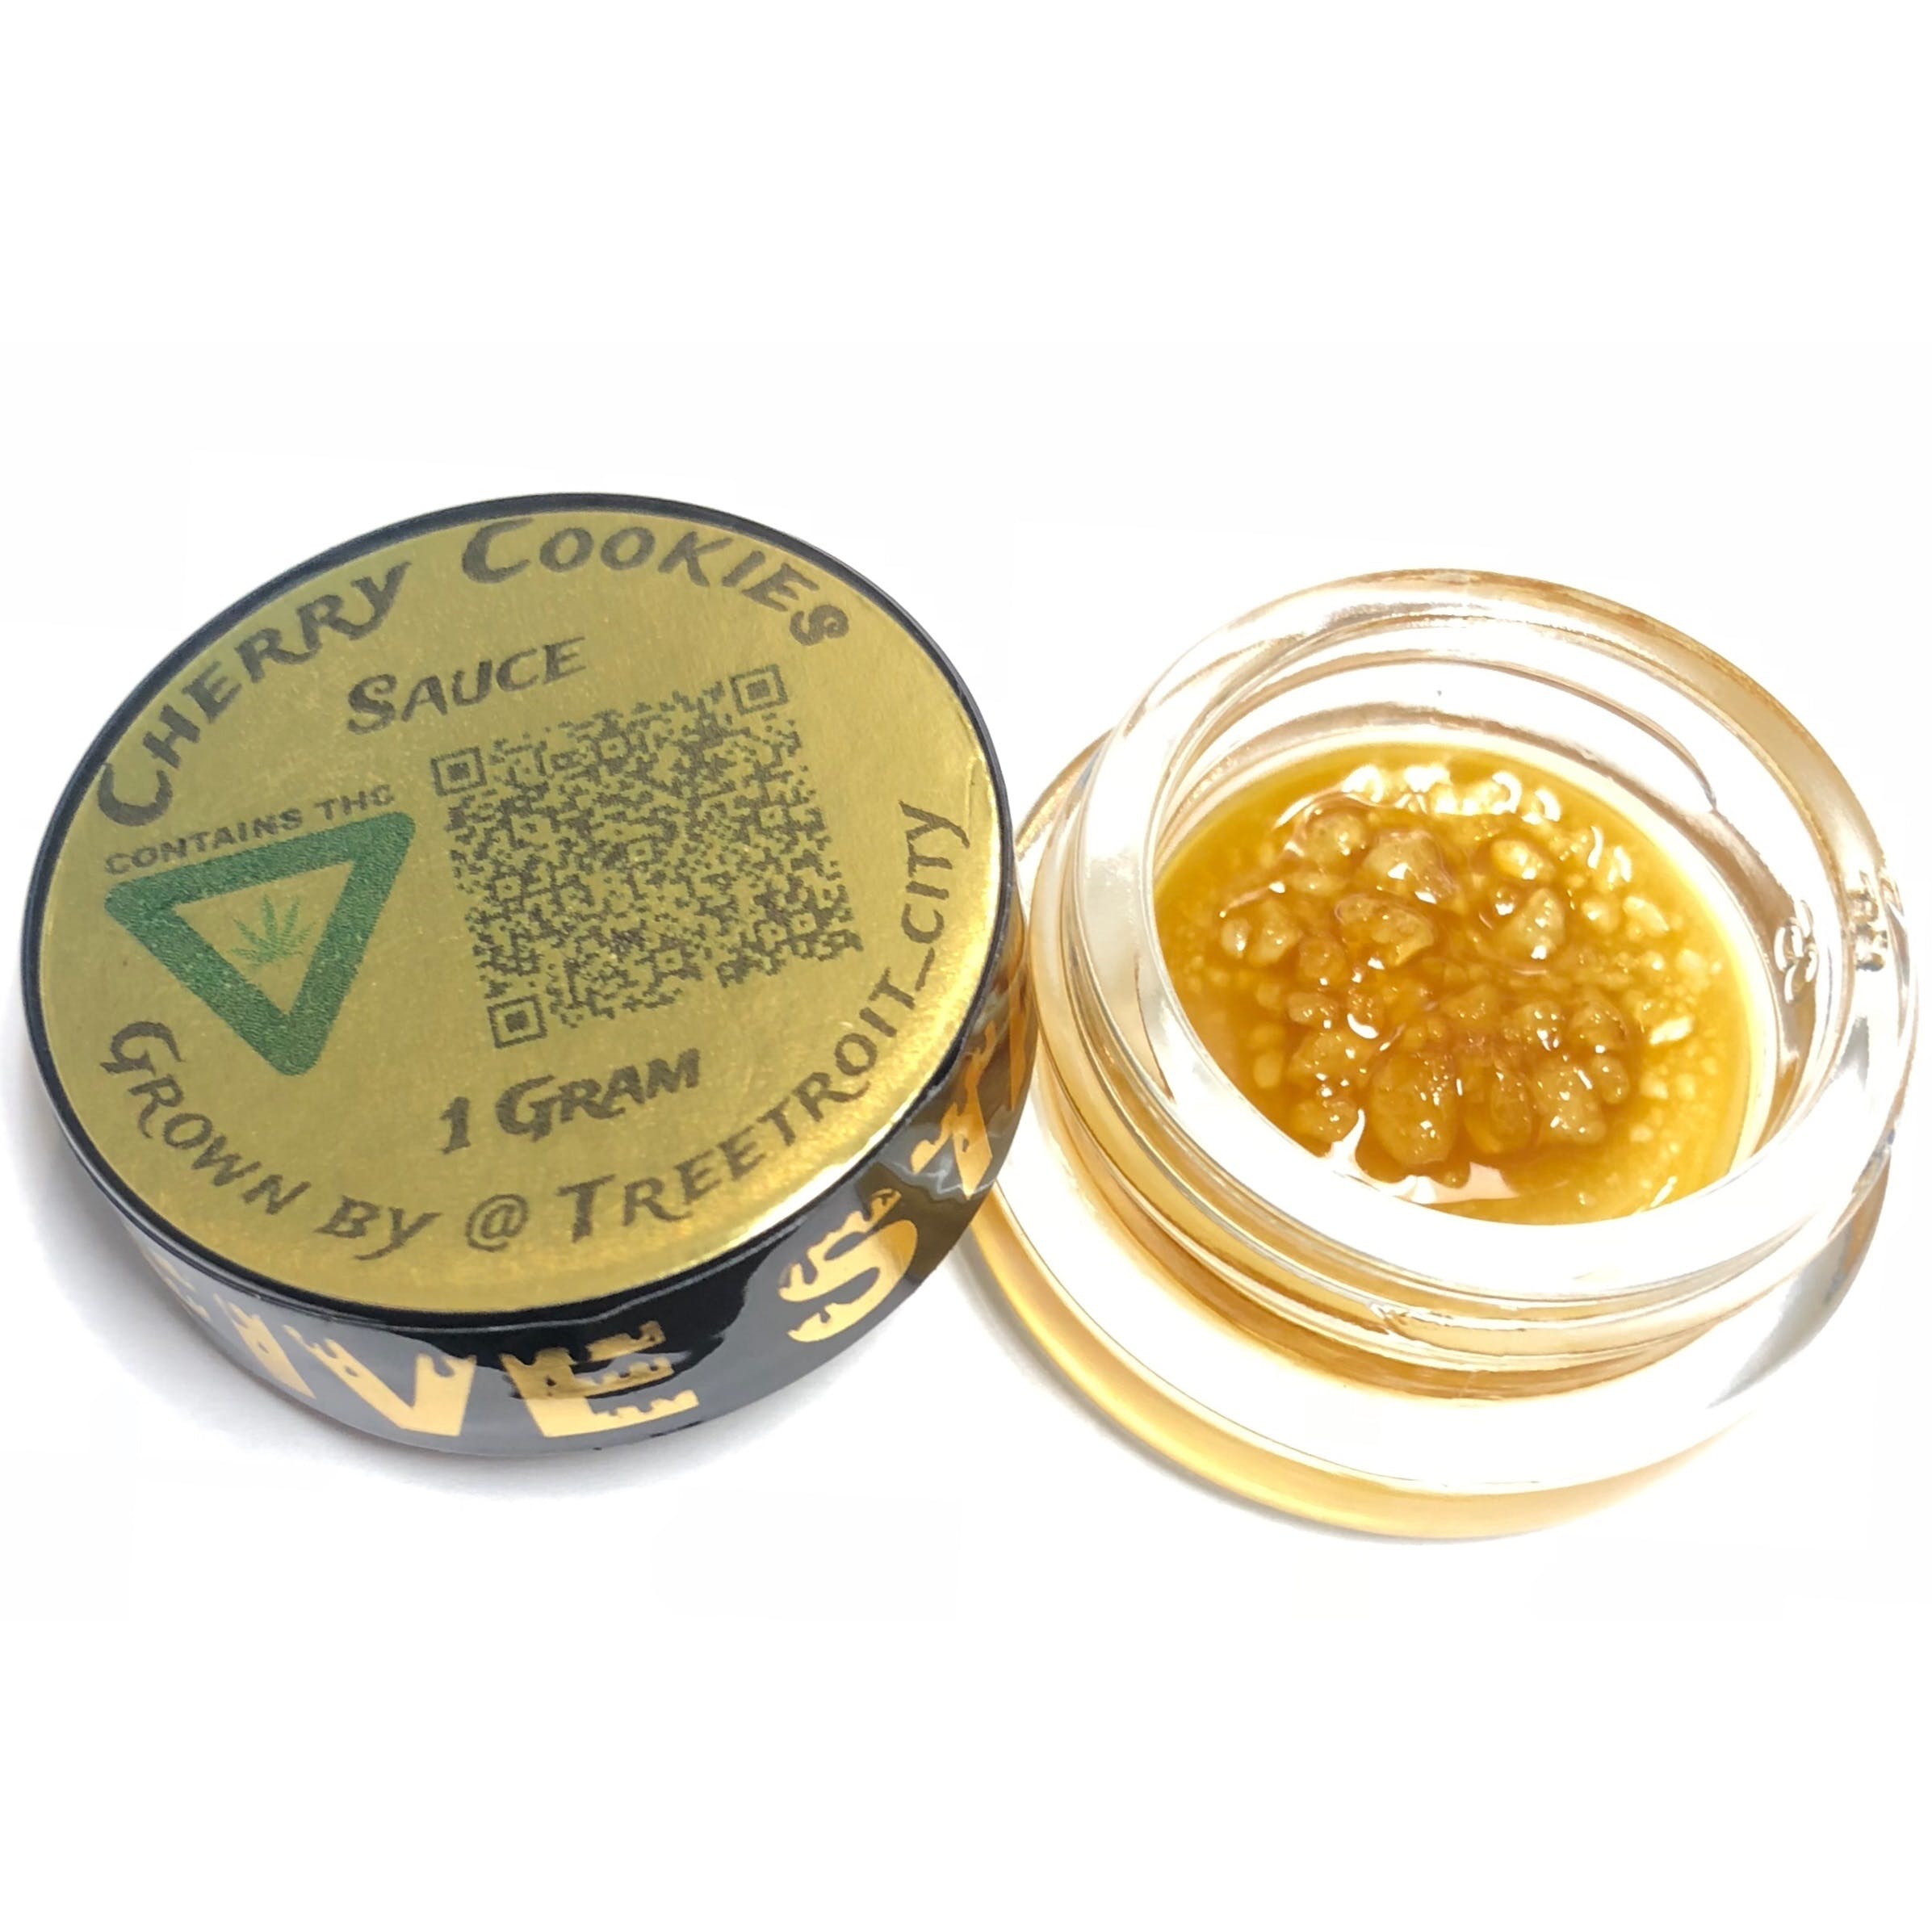 FIVE STAR EXTRACTS - CHERRY COOKIES SAUCE (1G)